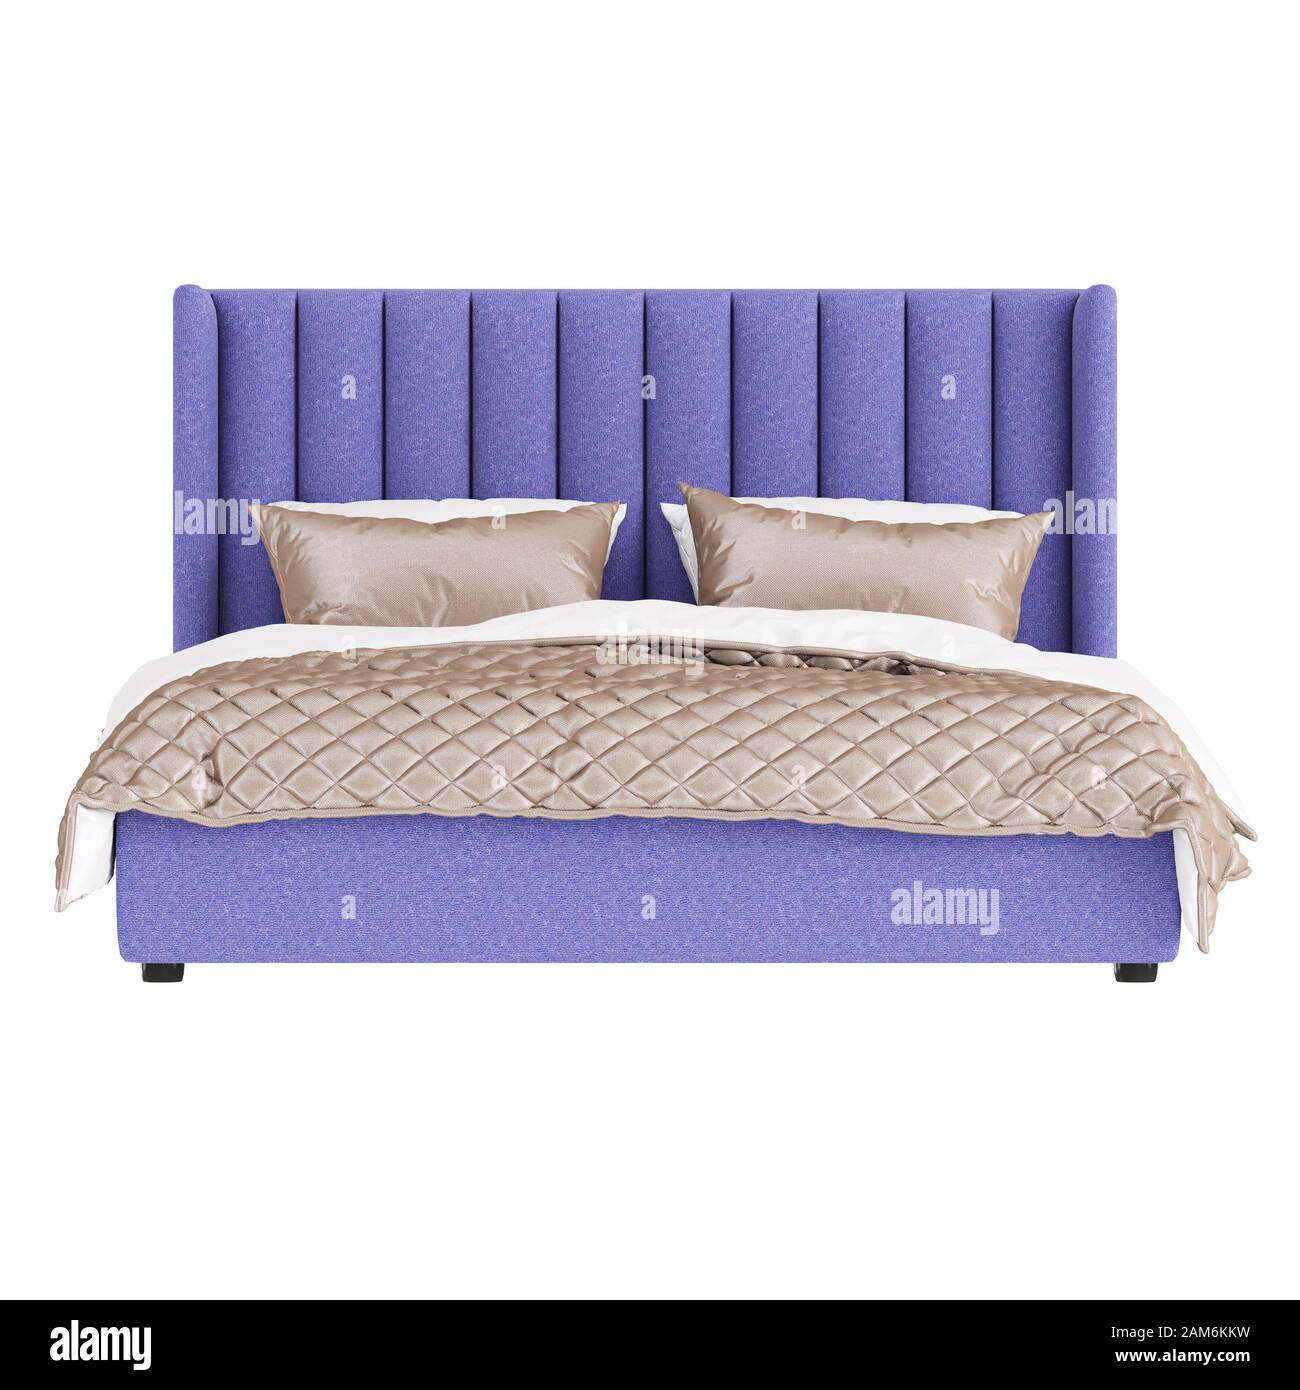 Double Bed With Soft Lilac Upholstery And Creamy White